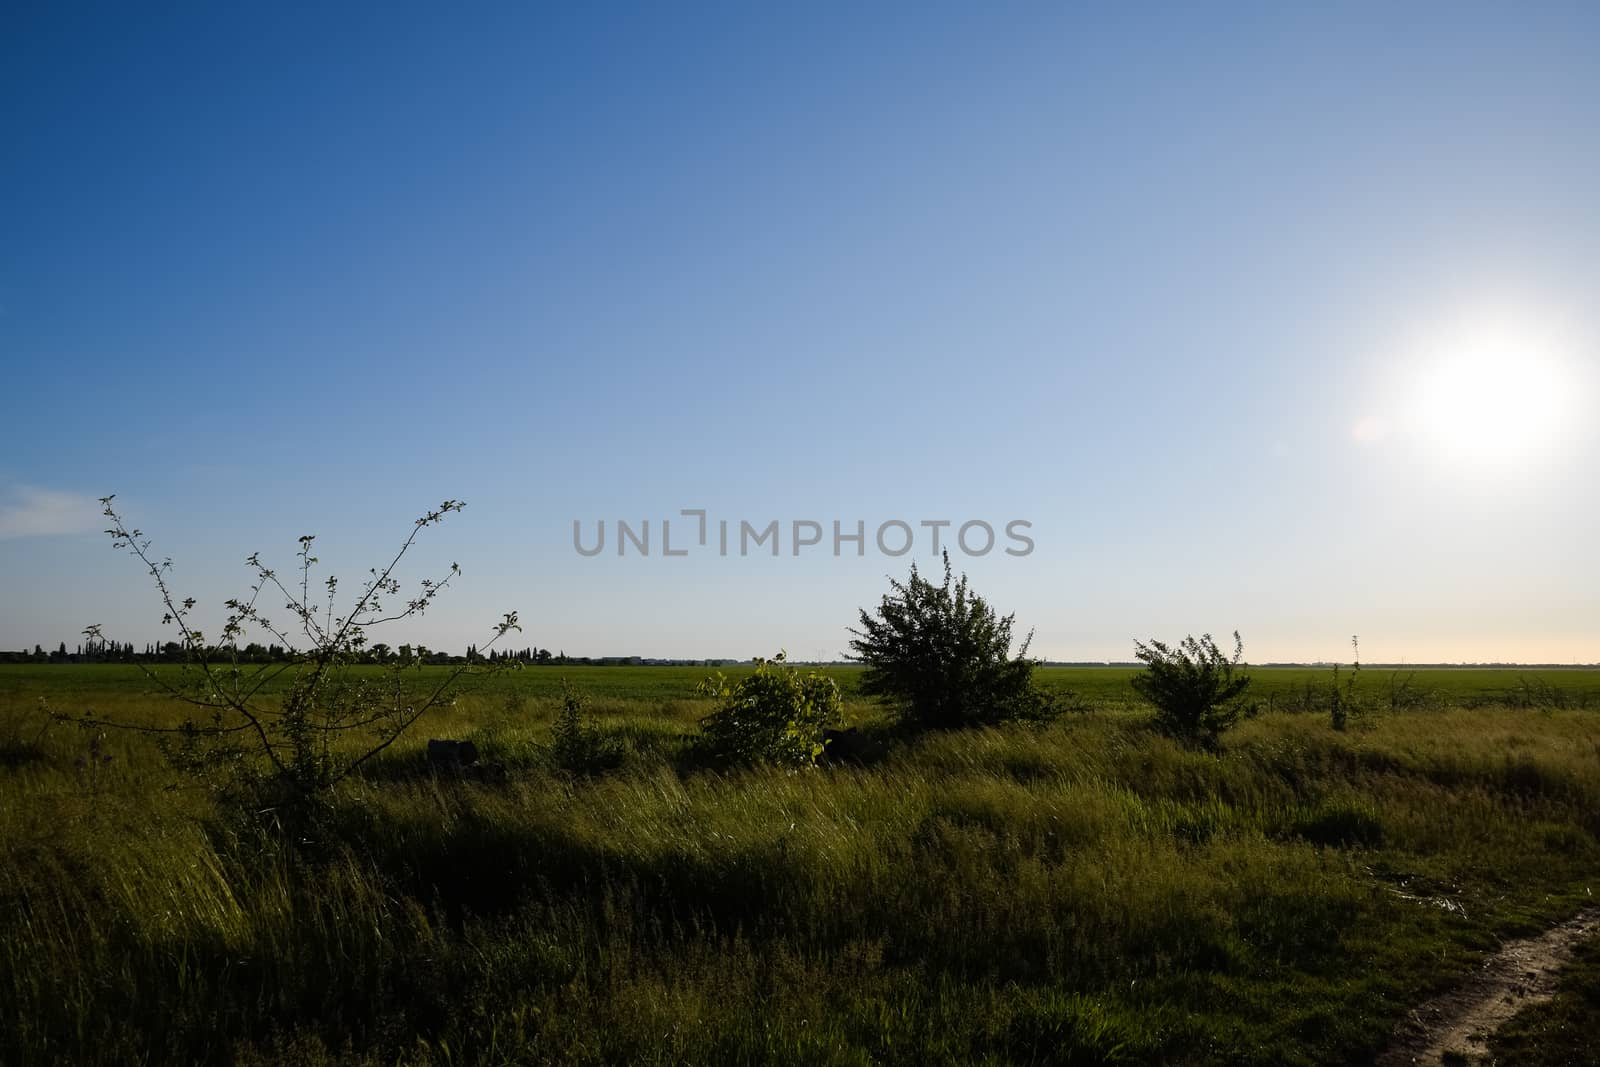 Landscape opposite the sun. Small trees and field on sunset background.